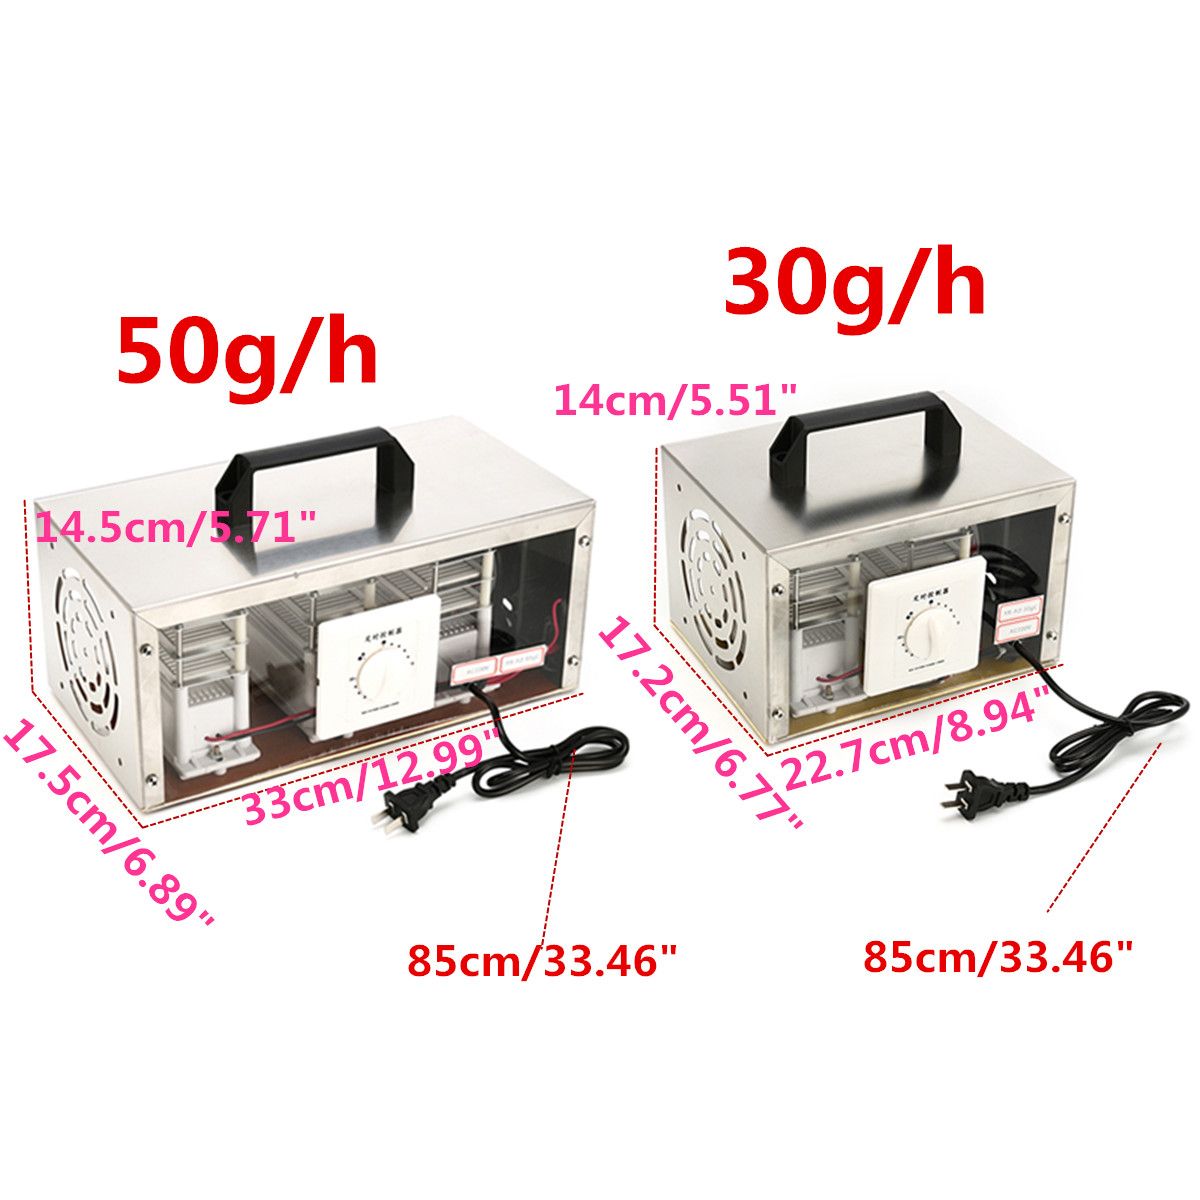 30gh-50gh-220V-Air-Ozone-Generator-Air-Purifier-Sterilizer-With-Timing-Switch-for-Home-Car-Office-Me-1290170